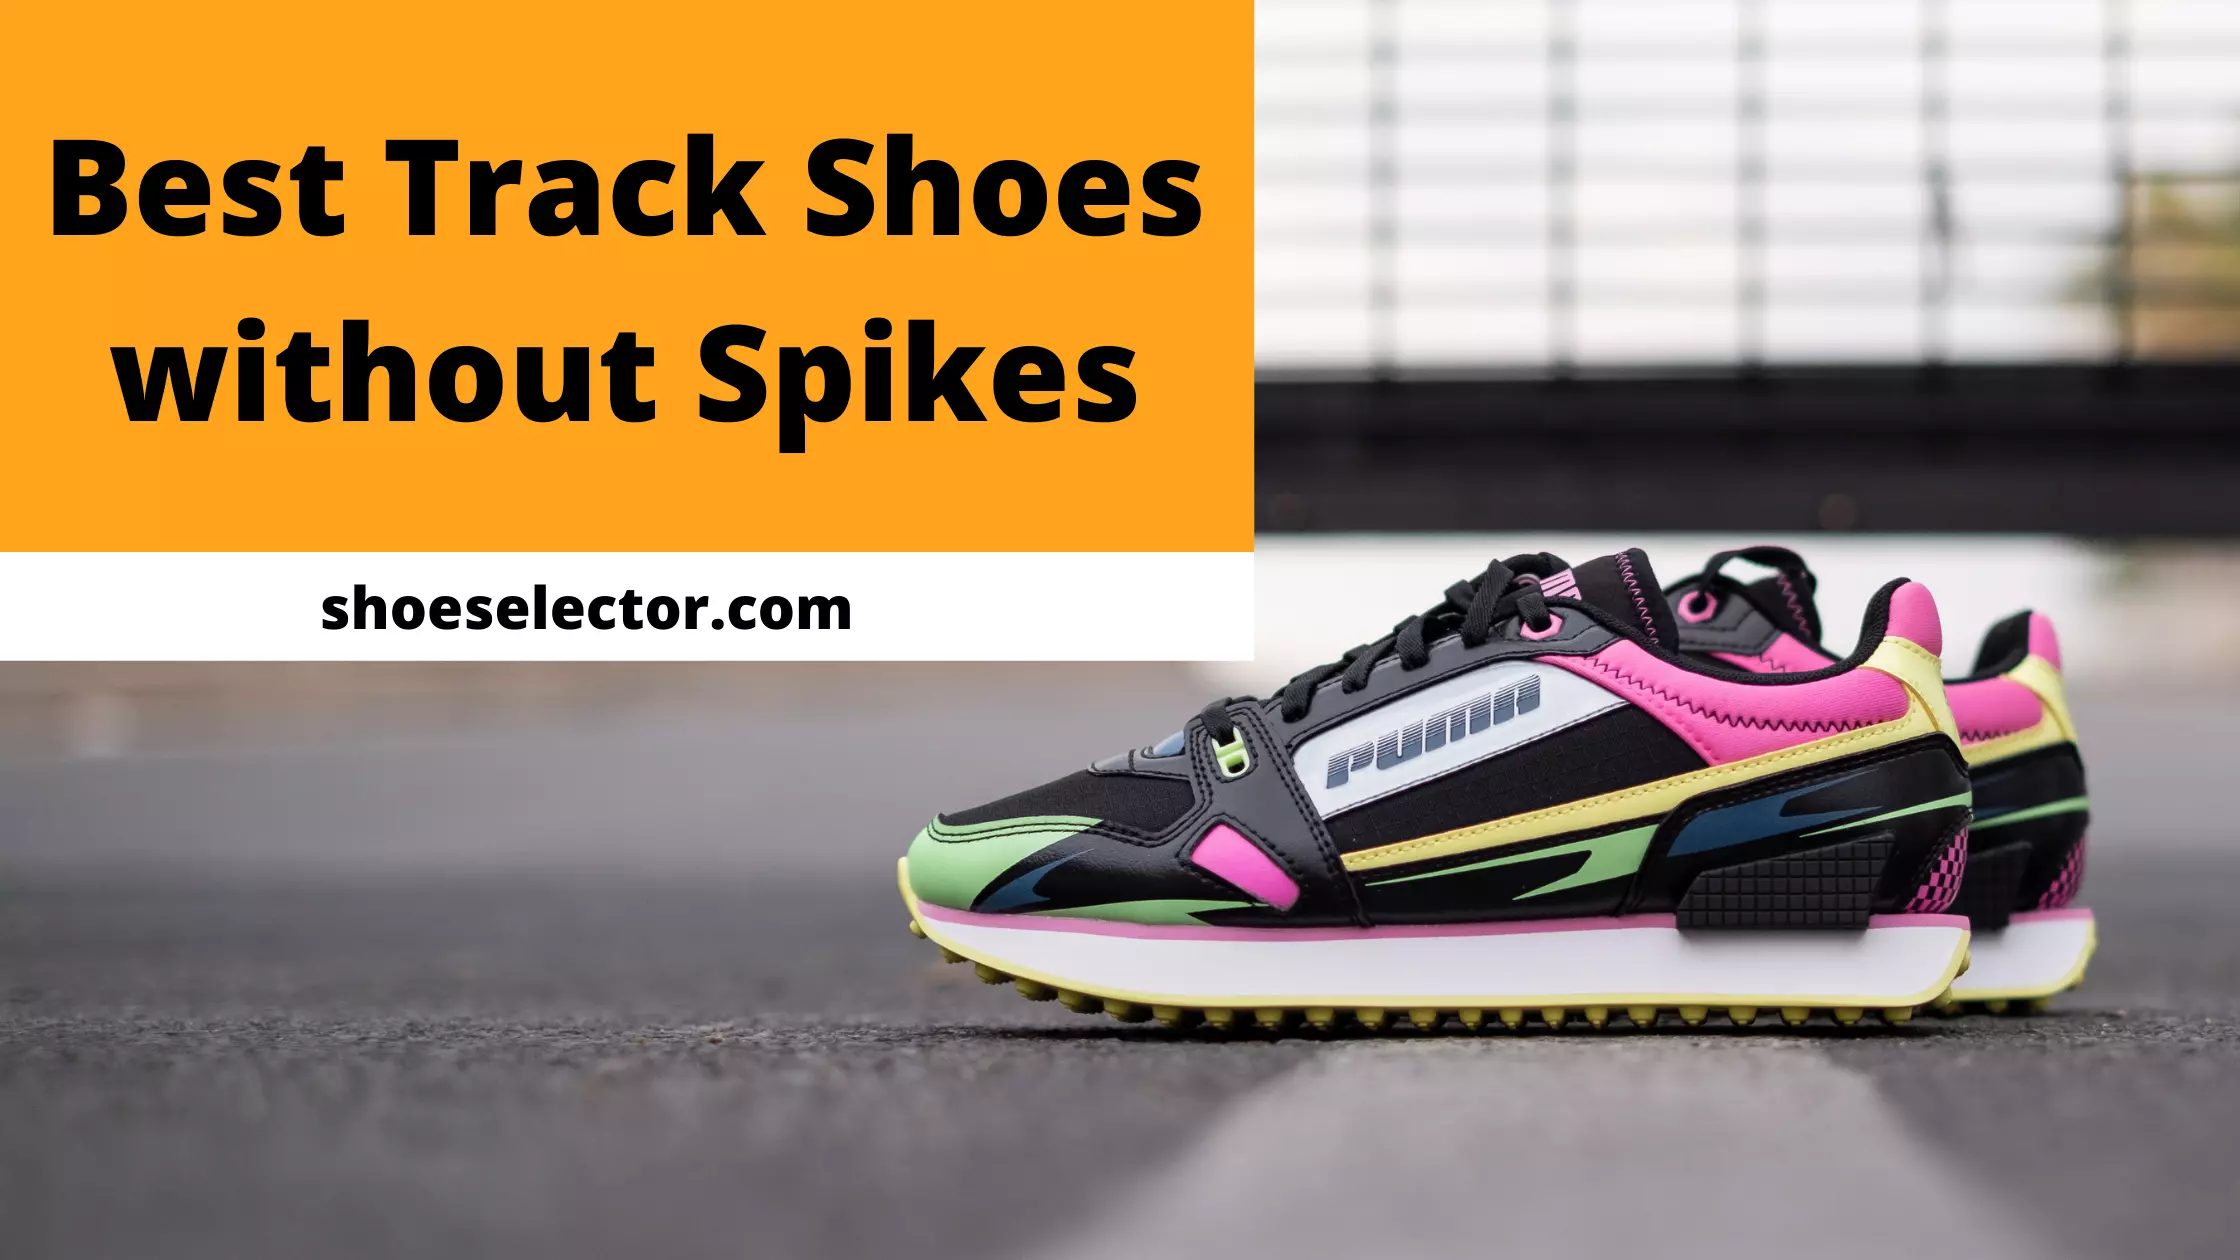 6 Best Track Shoes Without Spikes | Track and Racing Shoes